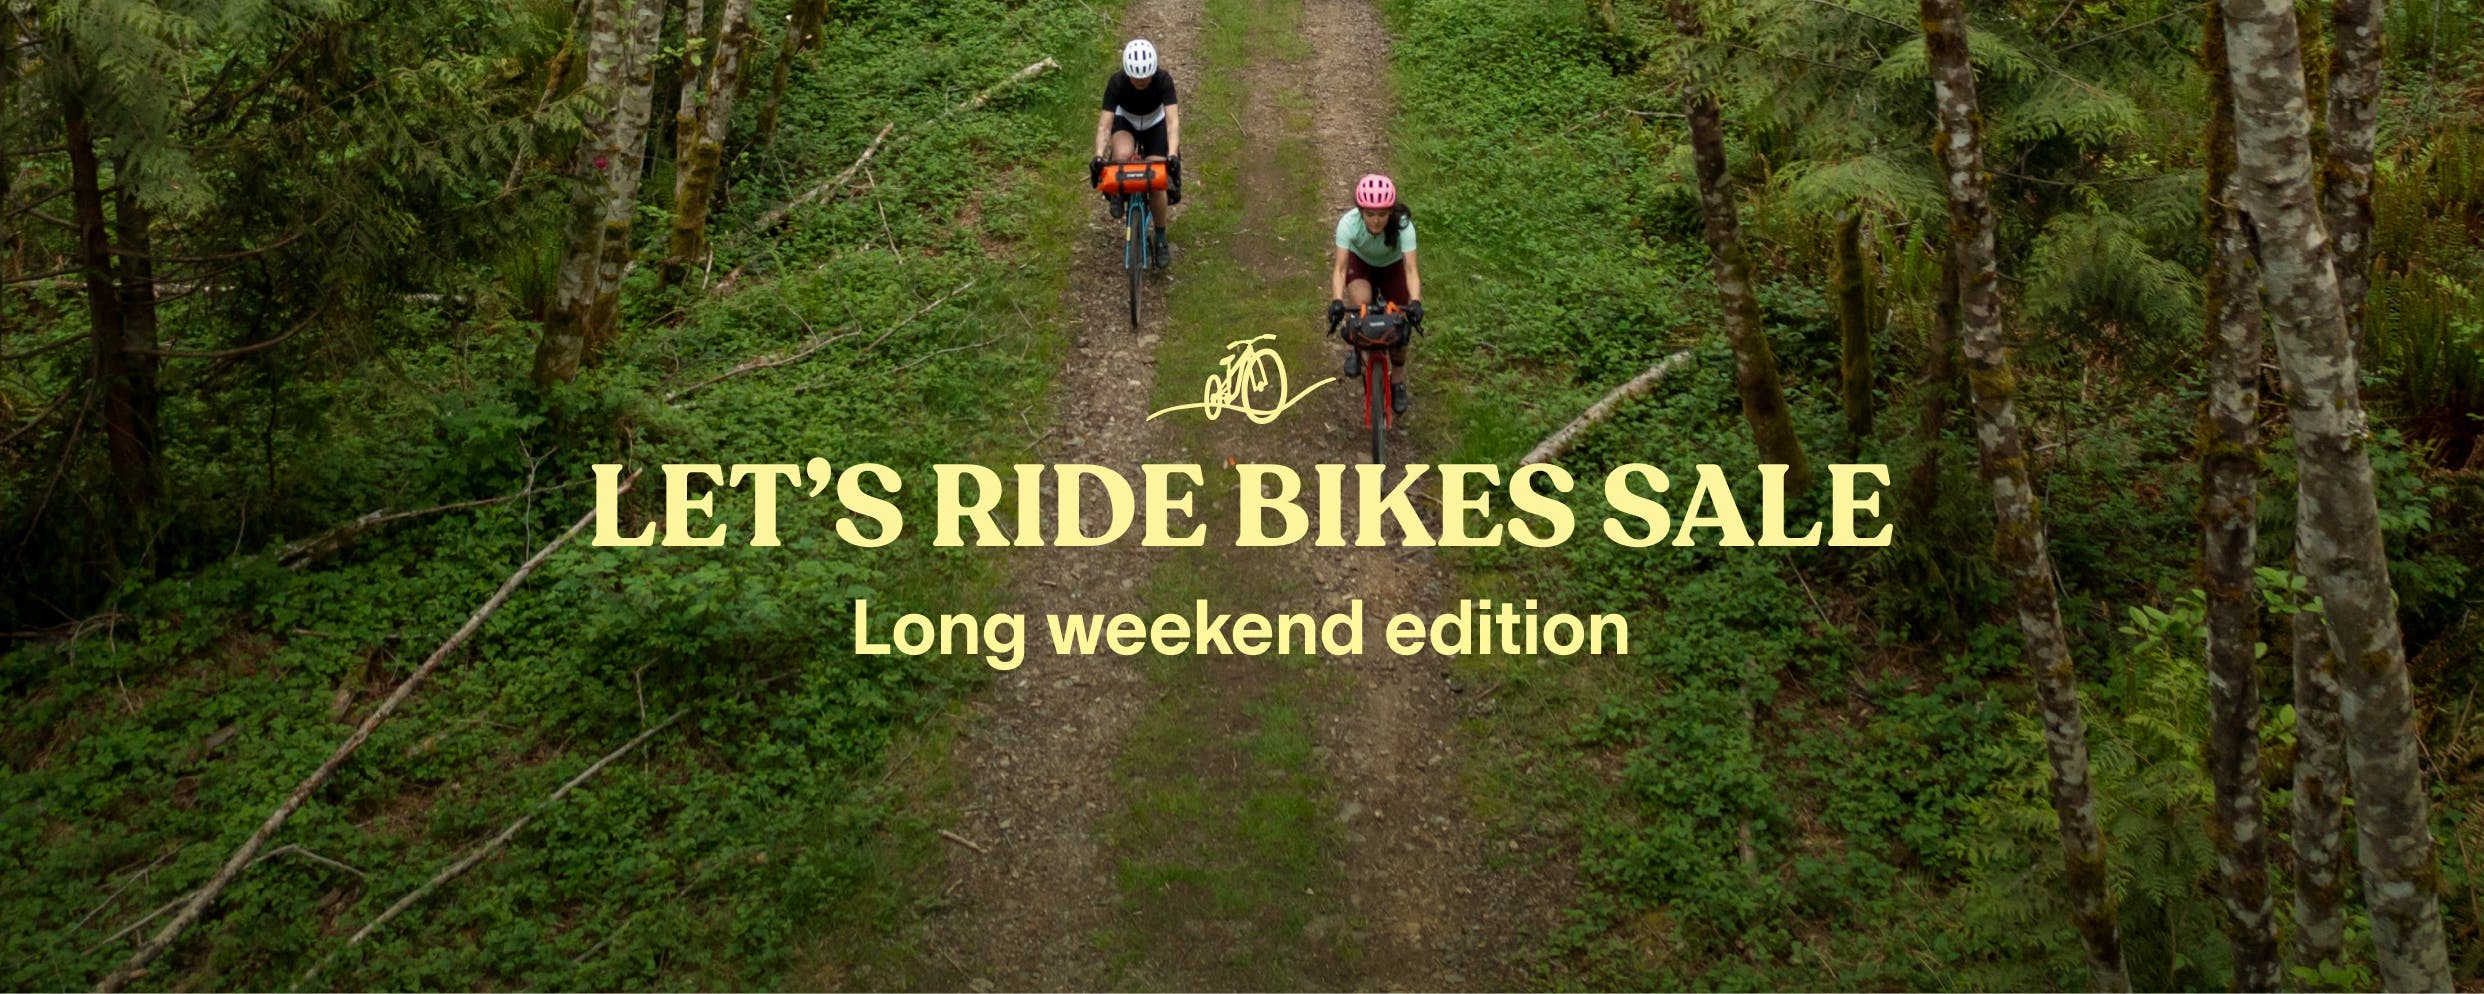 Find deals on all things bikes from Cannondale, MEC, Wahoo Fitness, Shimano and more.